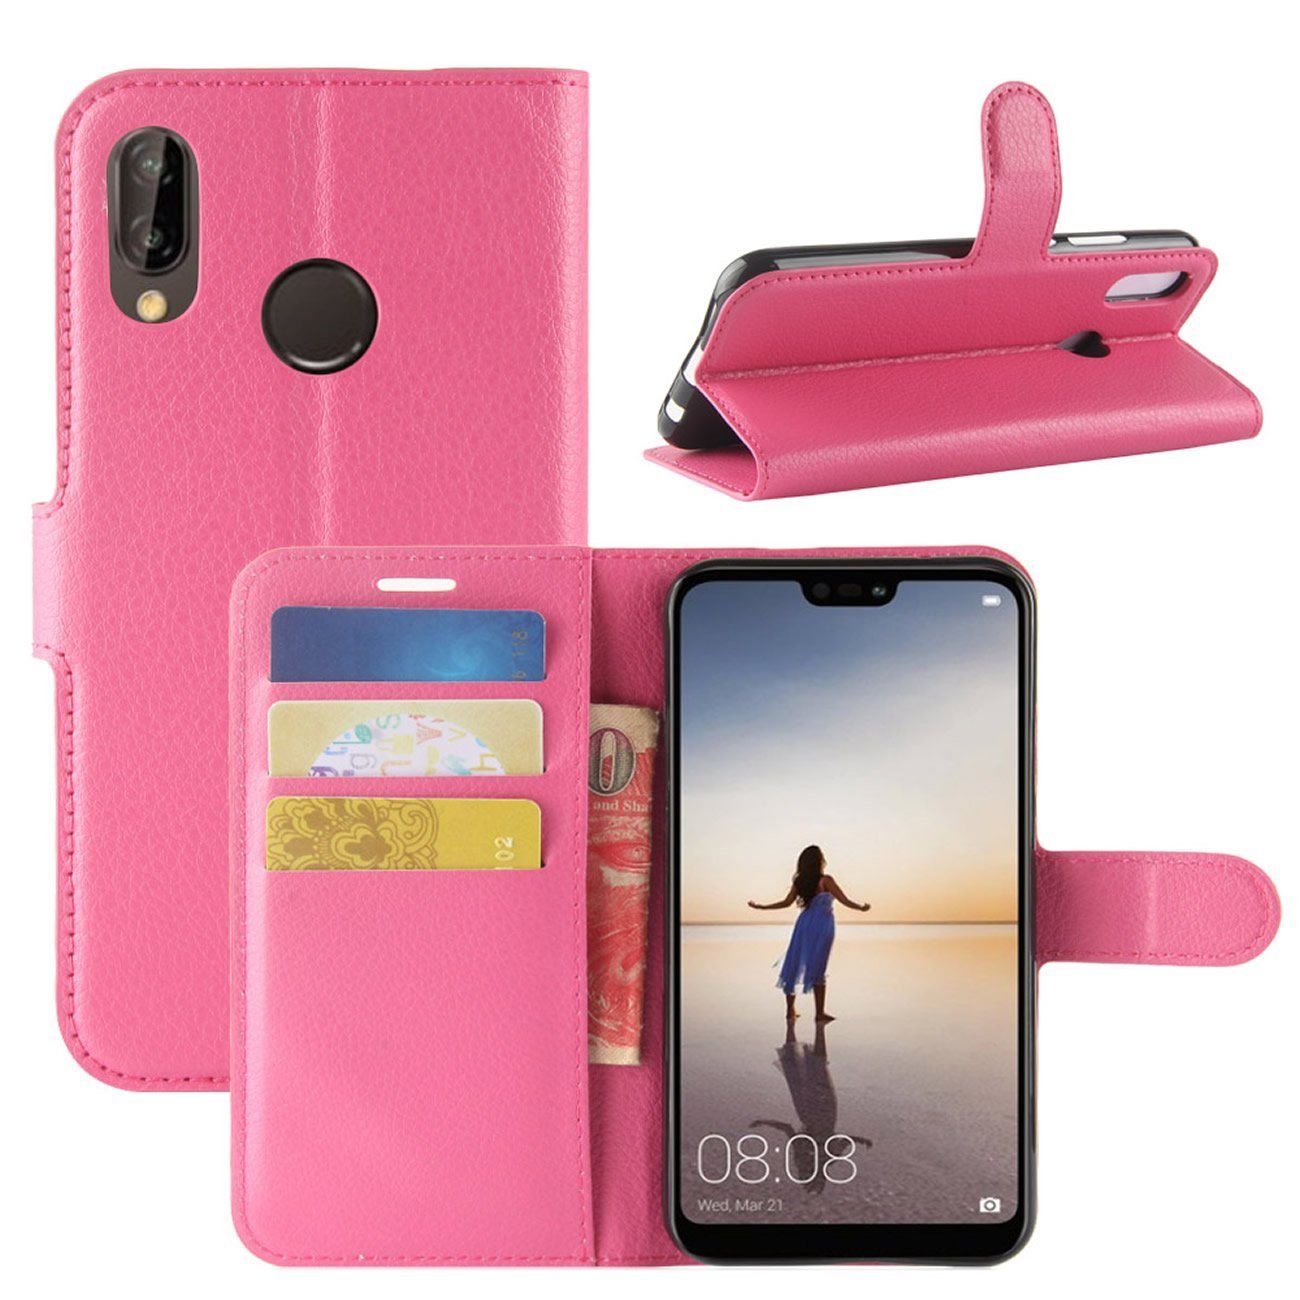 New Premium Leather Wallet Case TPU Cover For HUAWEI Nova 3e-Hot Pink